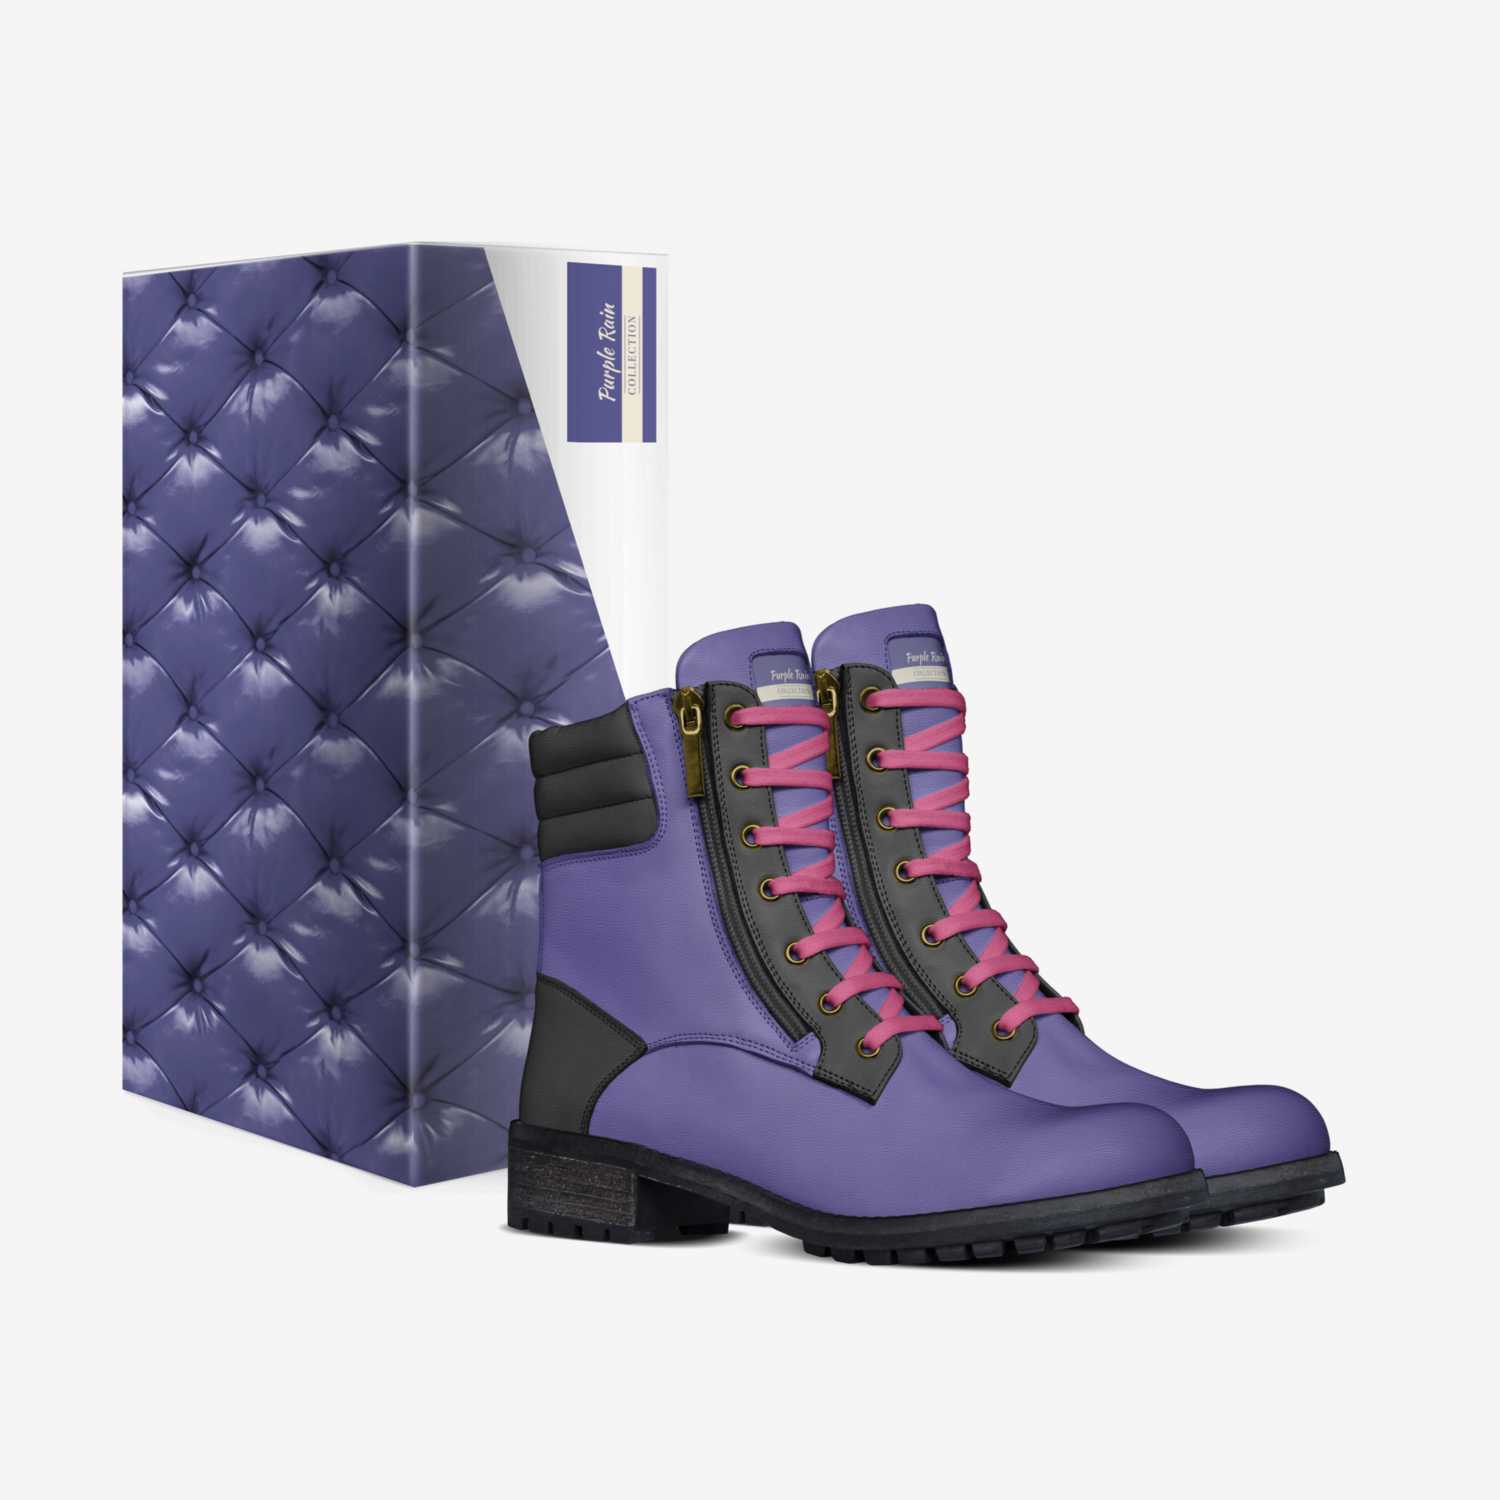 Purple Rain custom made in Italy shoes by Milla Kruse | Box view